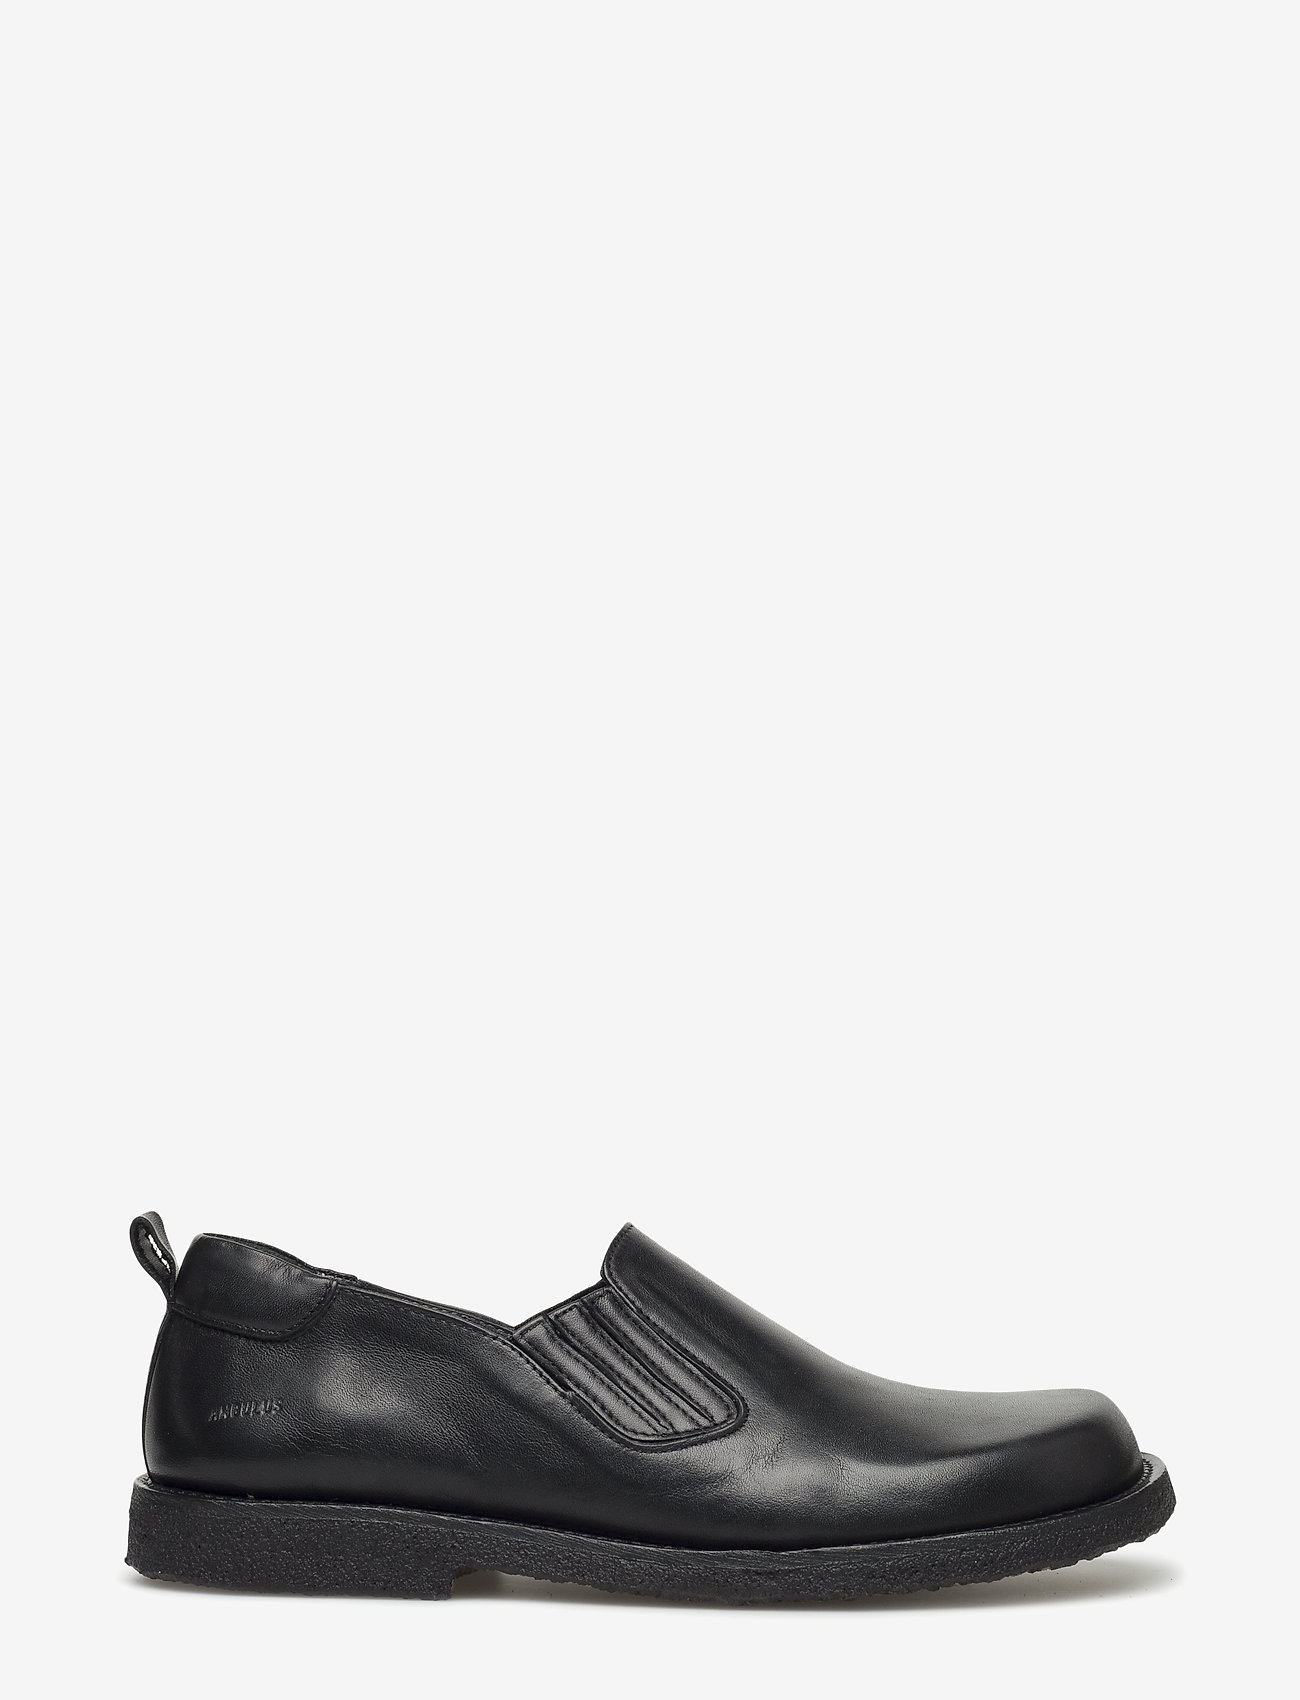 ANGULUS - Shoes - flat - with elastic - loafers - 1604/001 black/black - 1